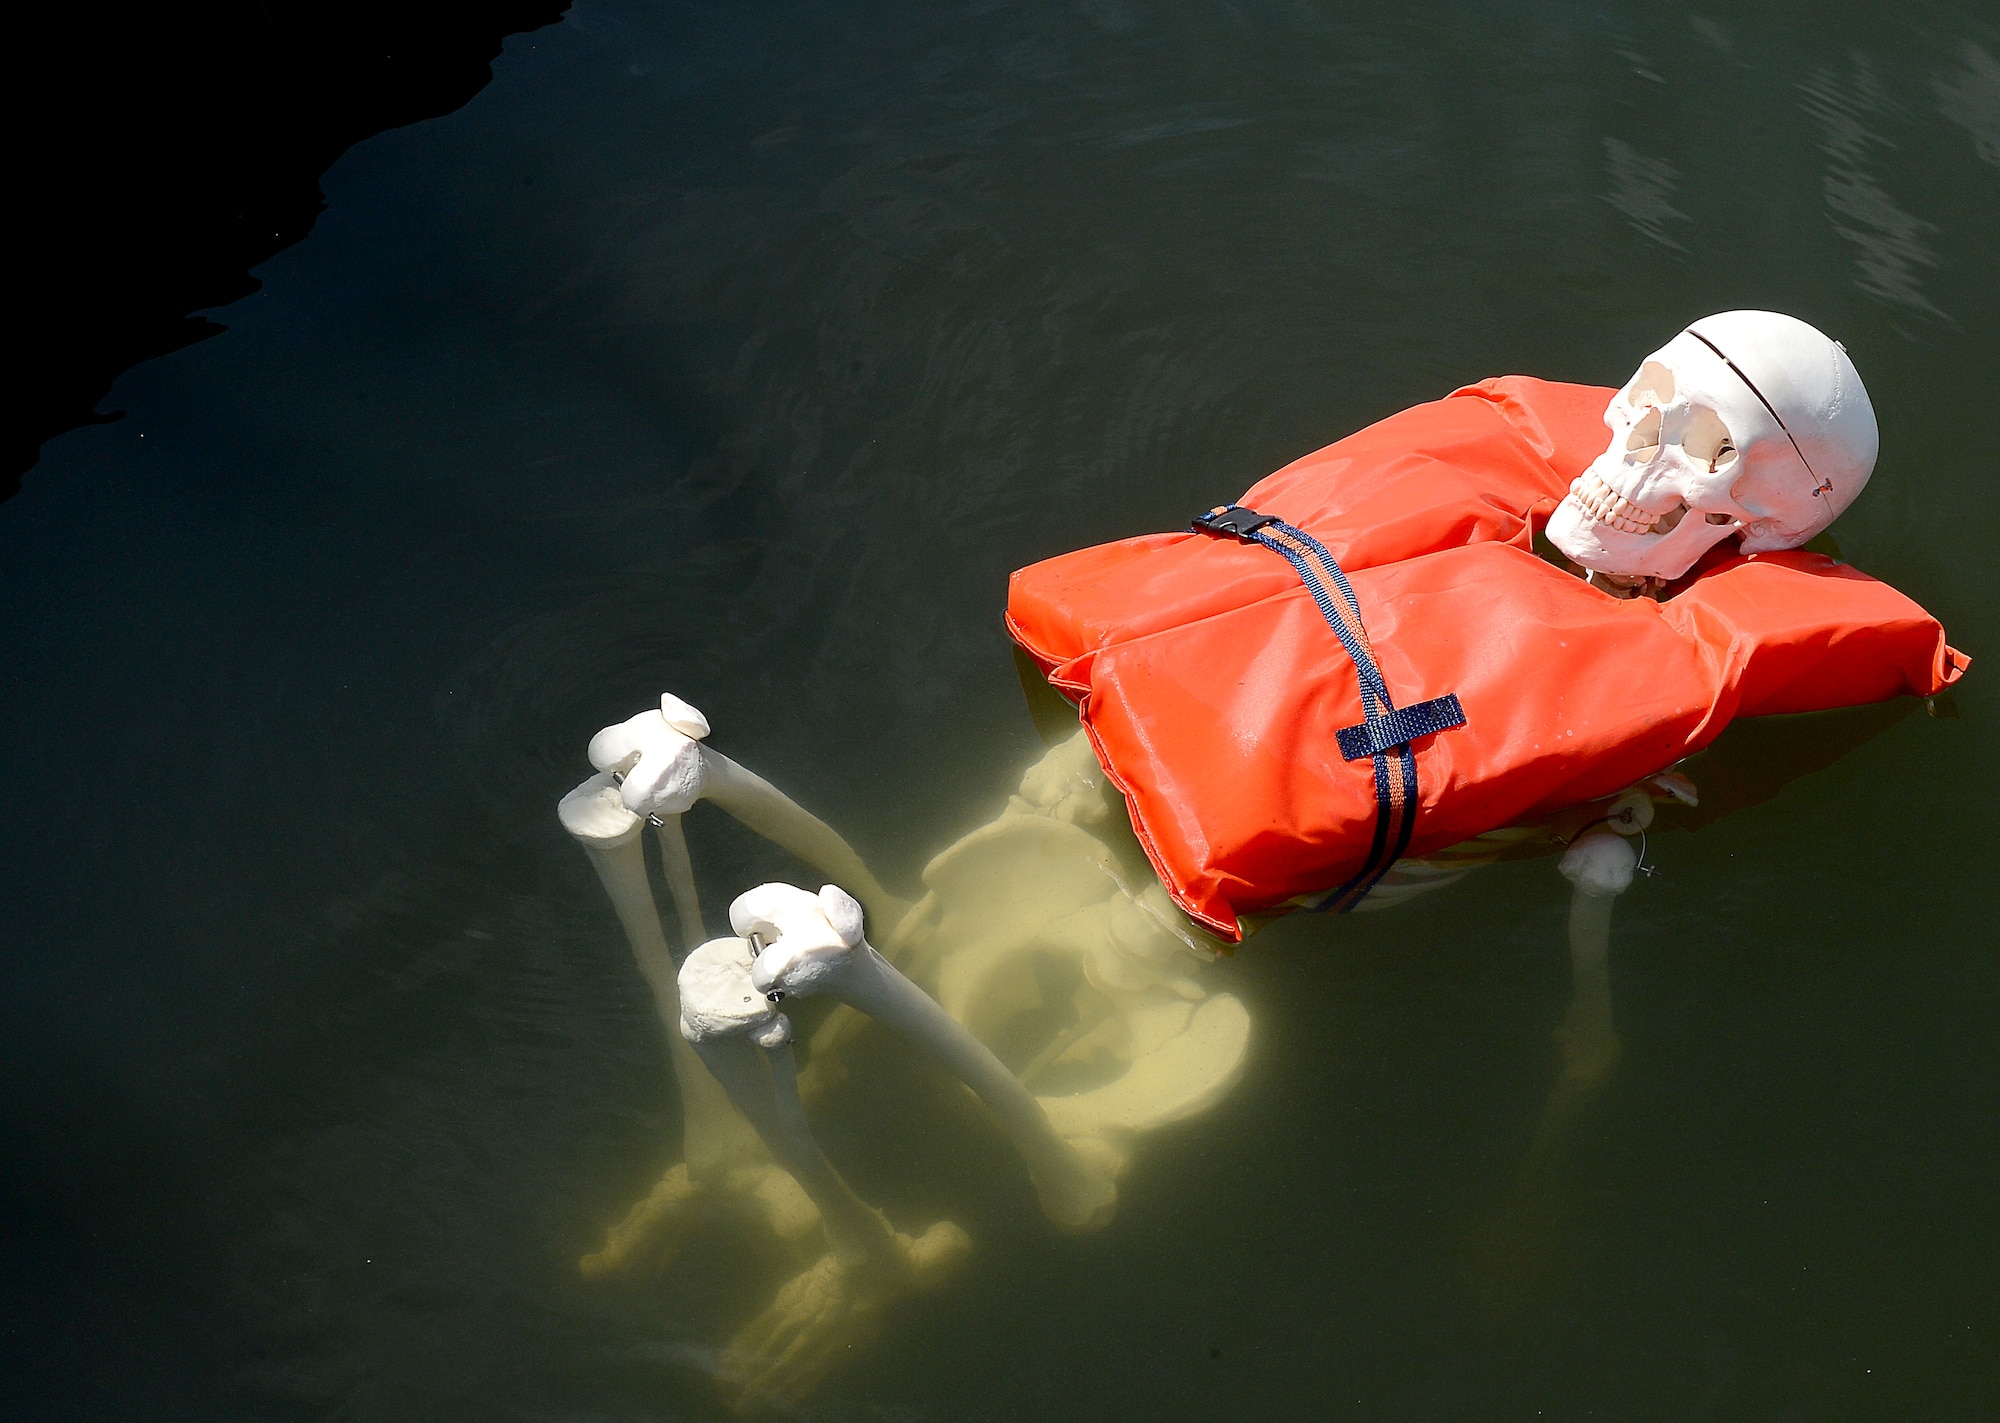 MacBones, 6th Air Mobility Wing safety skeleton, floats in the water at MacDill Air Force Base, Fla., June 26, 2014. Children and inexperienced swimmers should wear approved life jackets when in or near water. (U.S. Air Force photo by Staff Sgt. Brittany Liddon/Released)